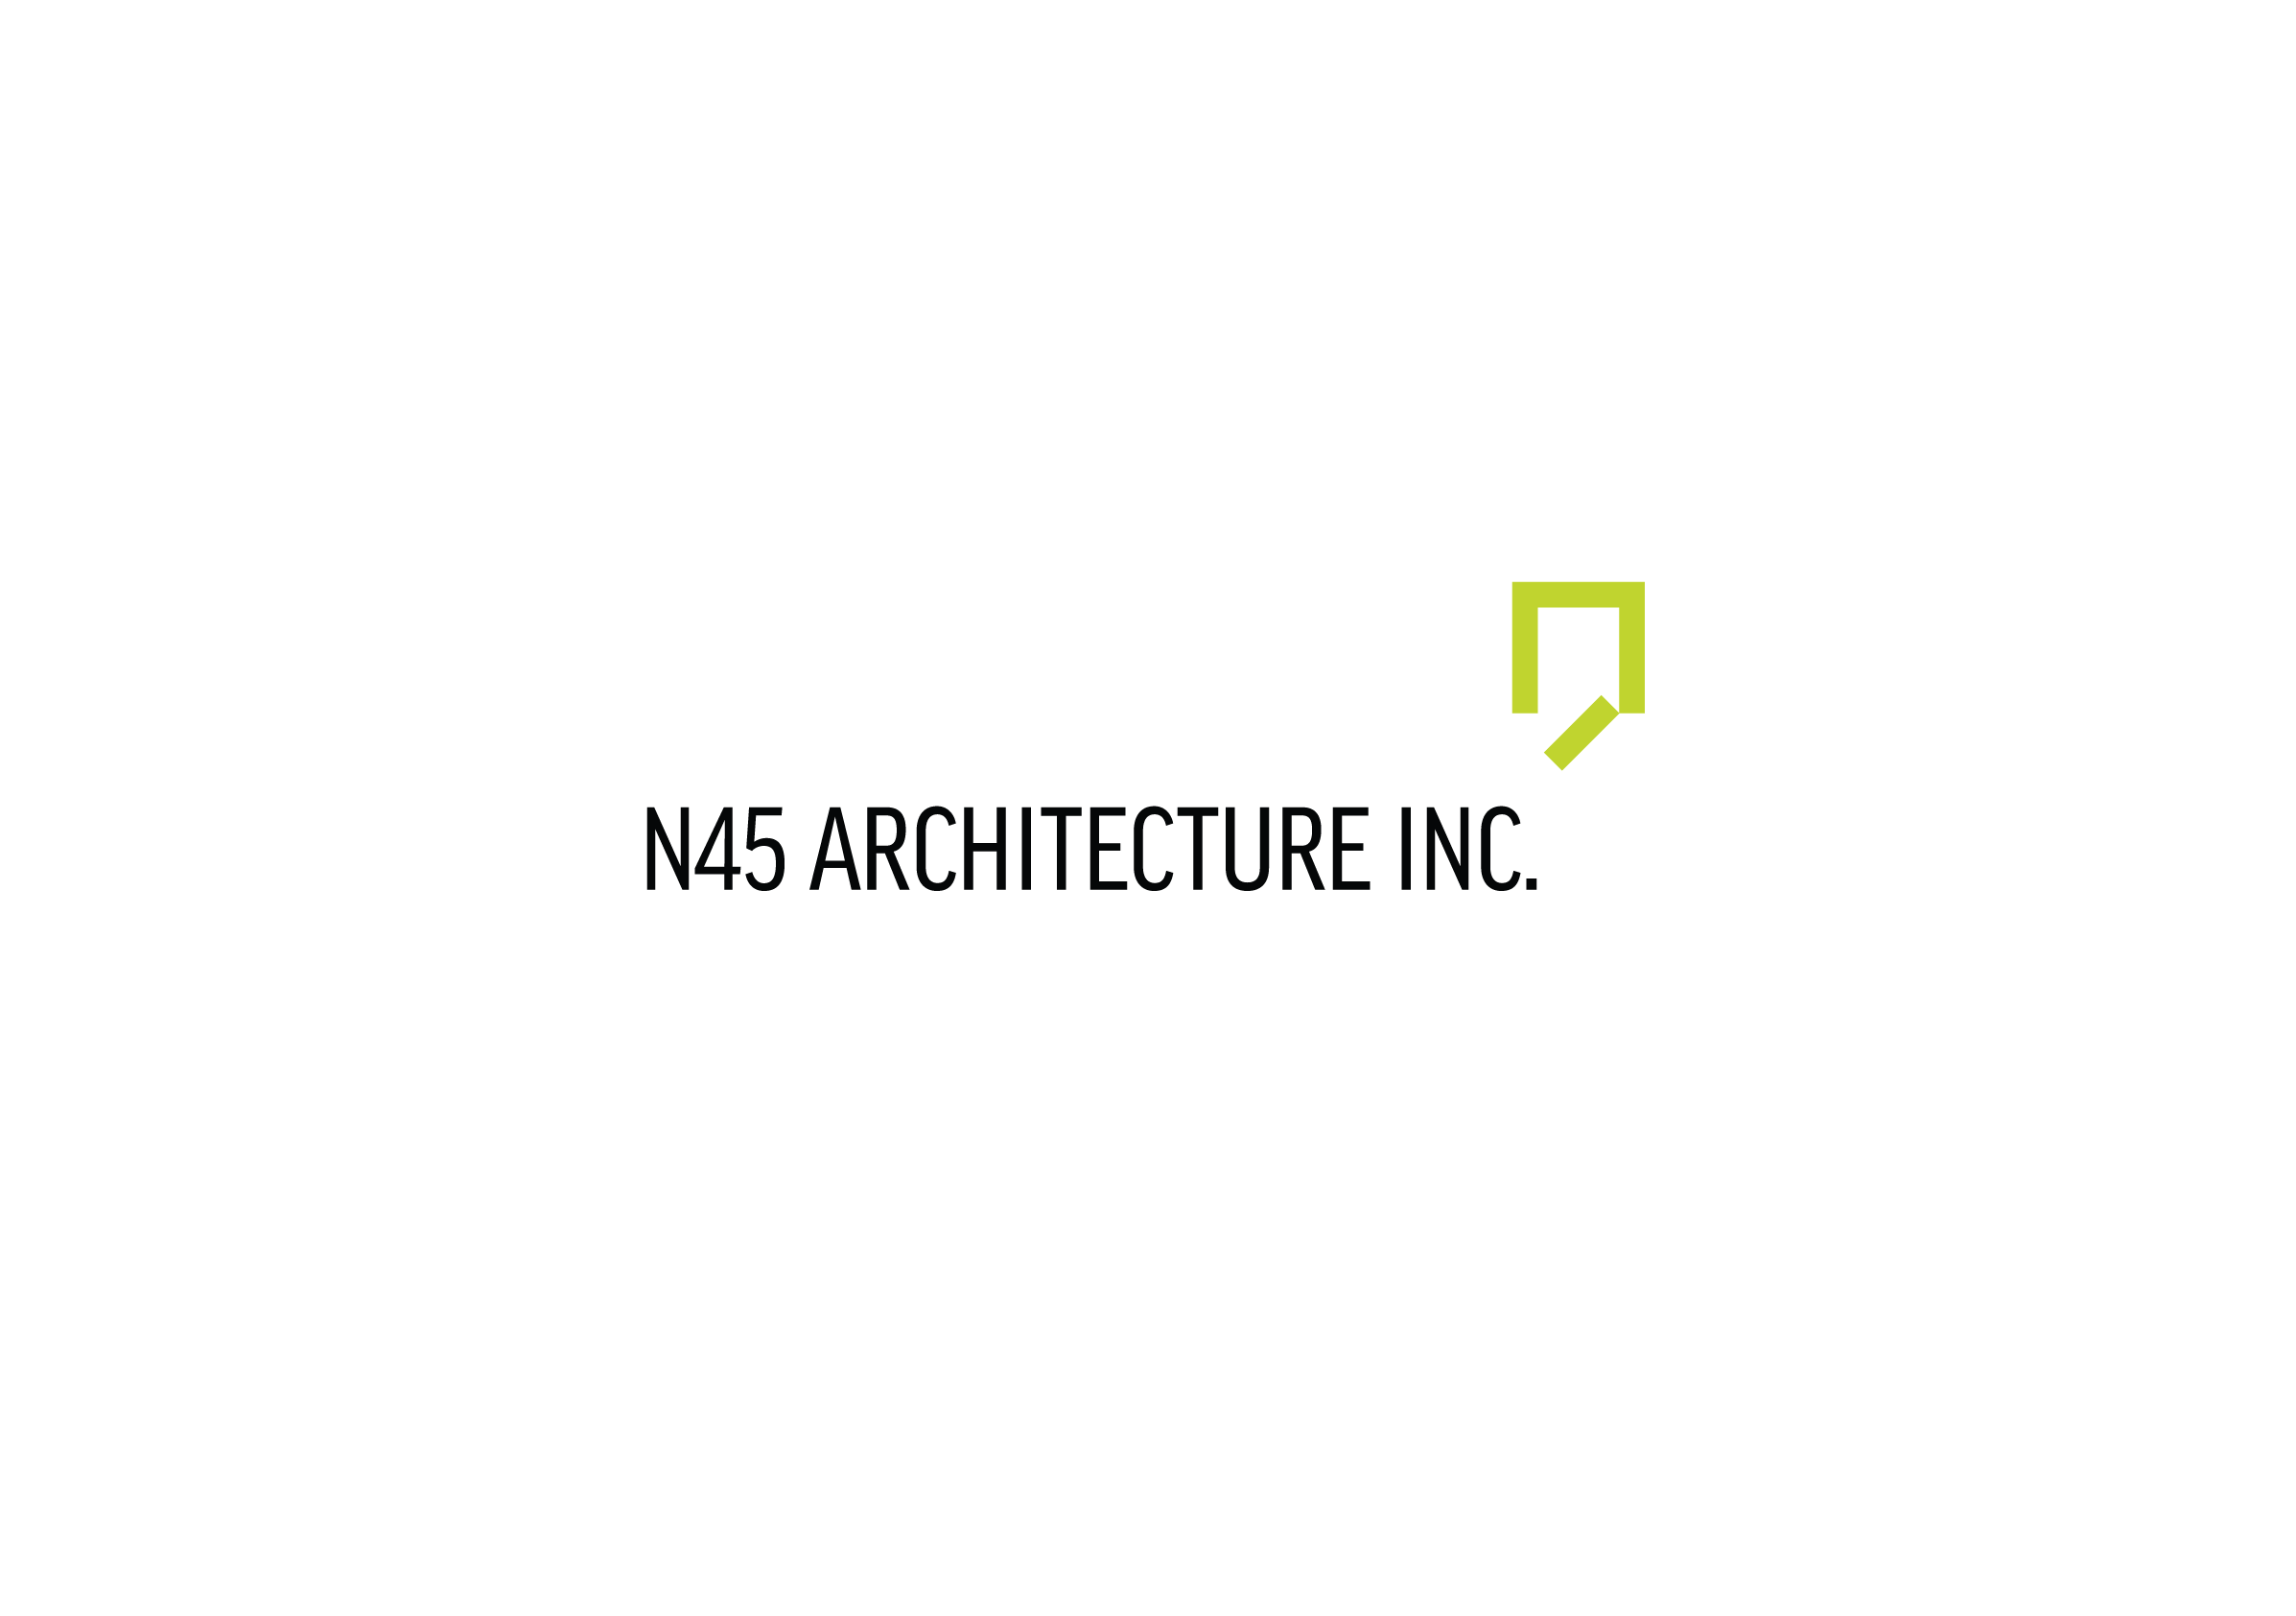 Logo for N45 Architecture Inc., architects by Graphic Designer idApostle